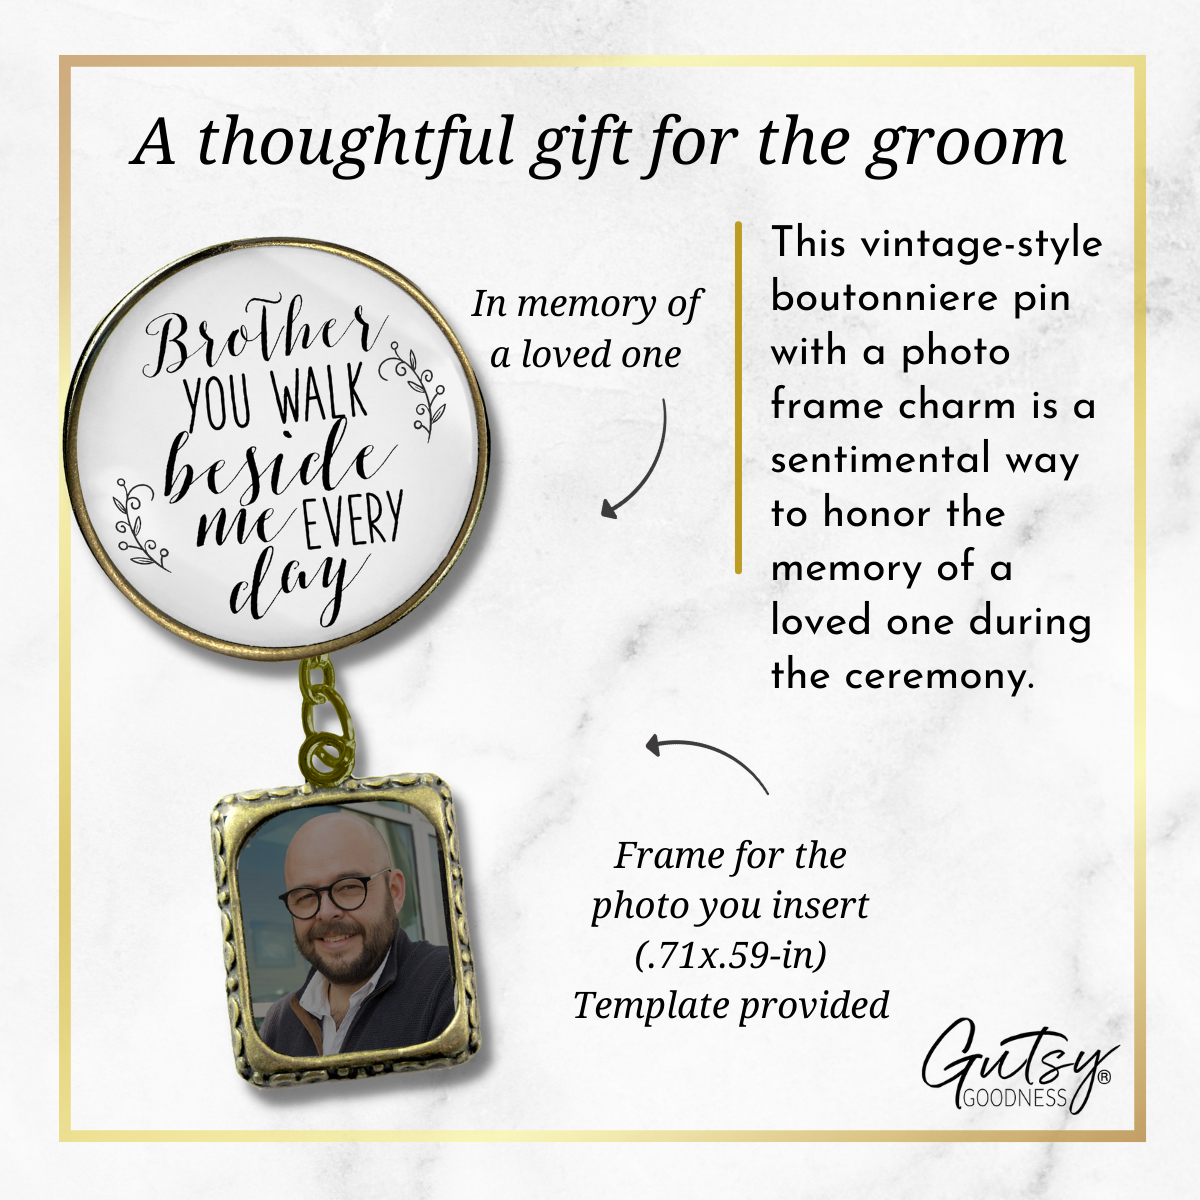 Wedding Memorial Boutonniere Pin Photo Frame Honor Brother Vintage White For Men - Gutsy Goodness